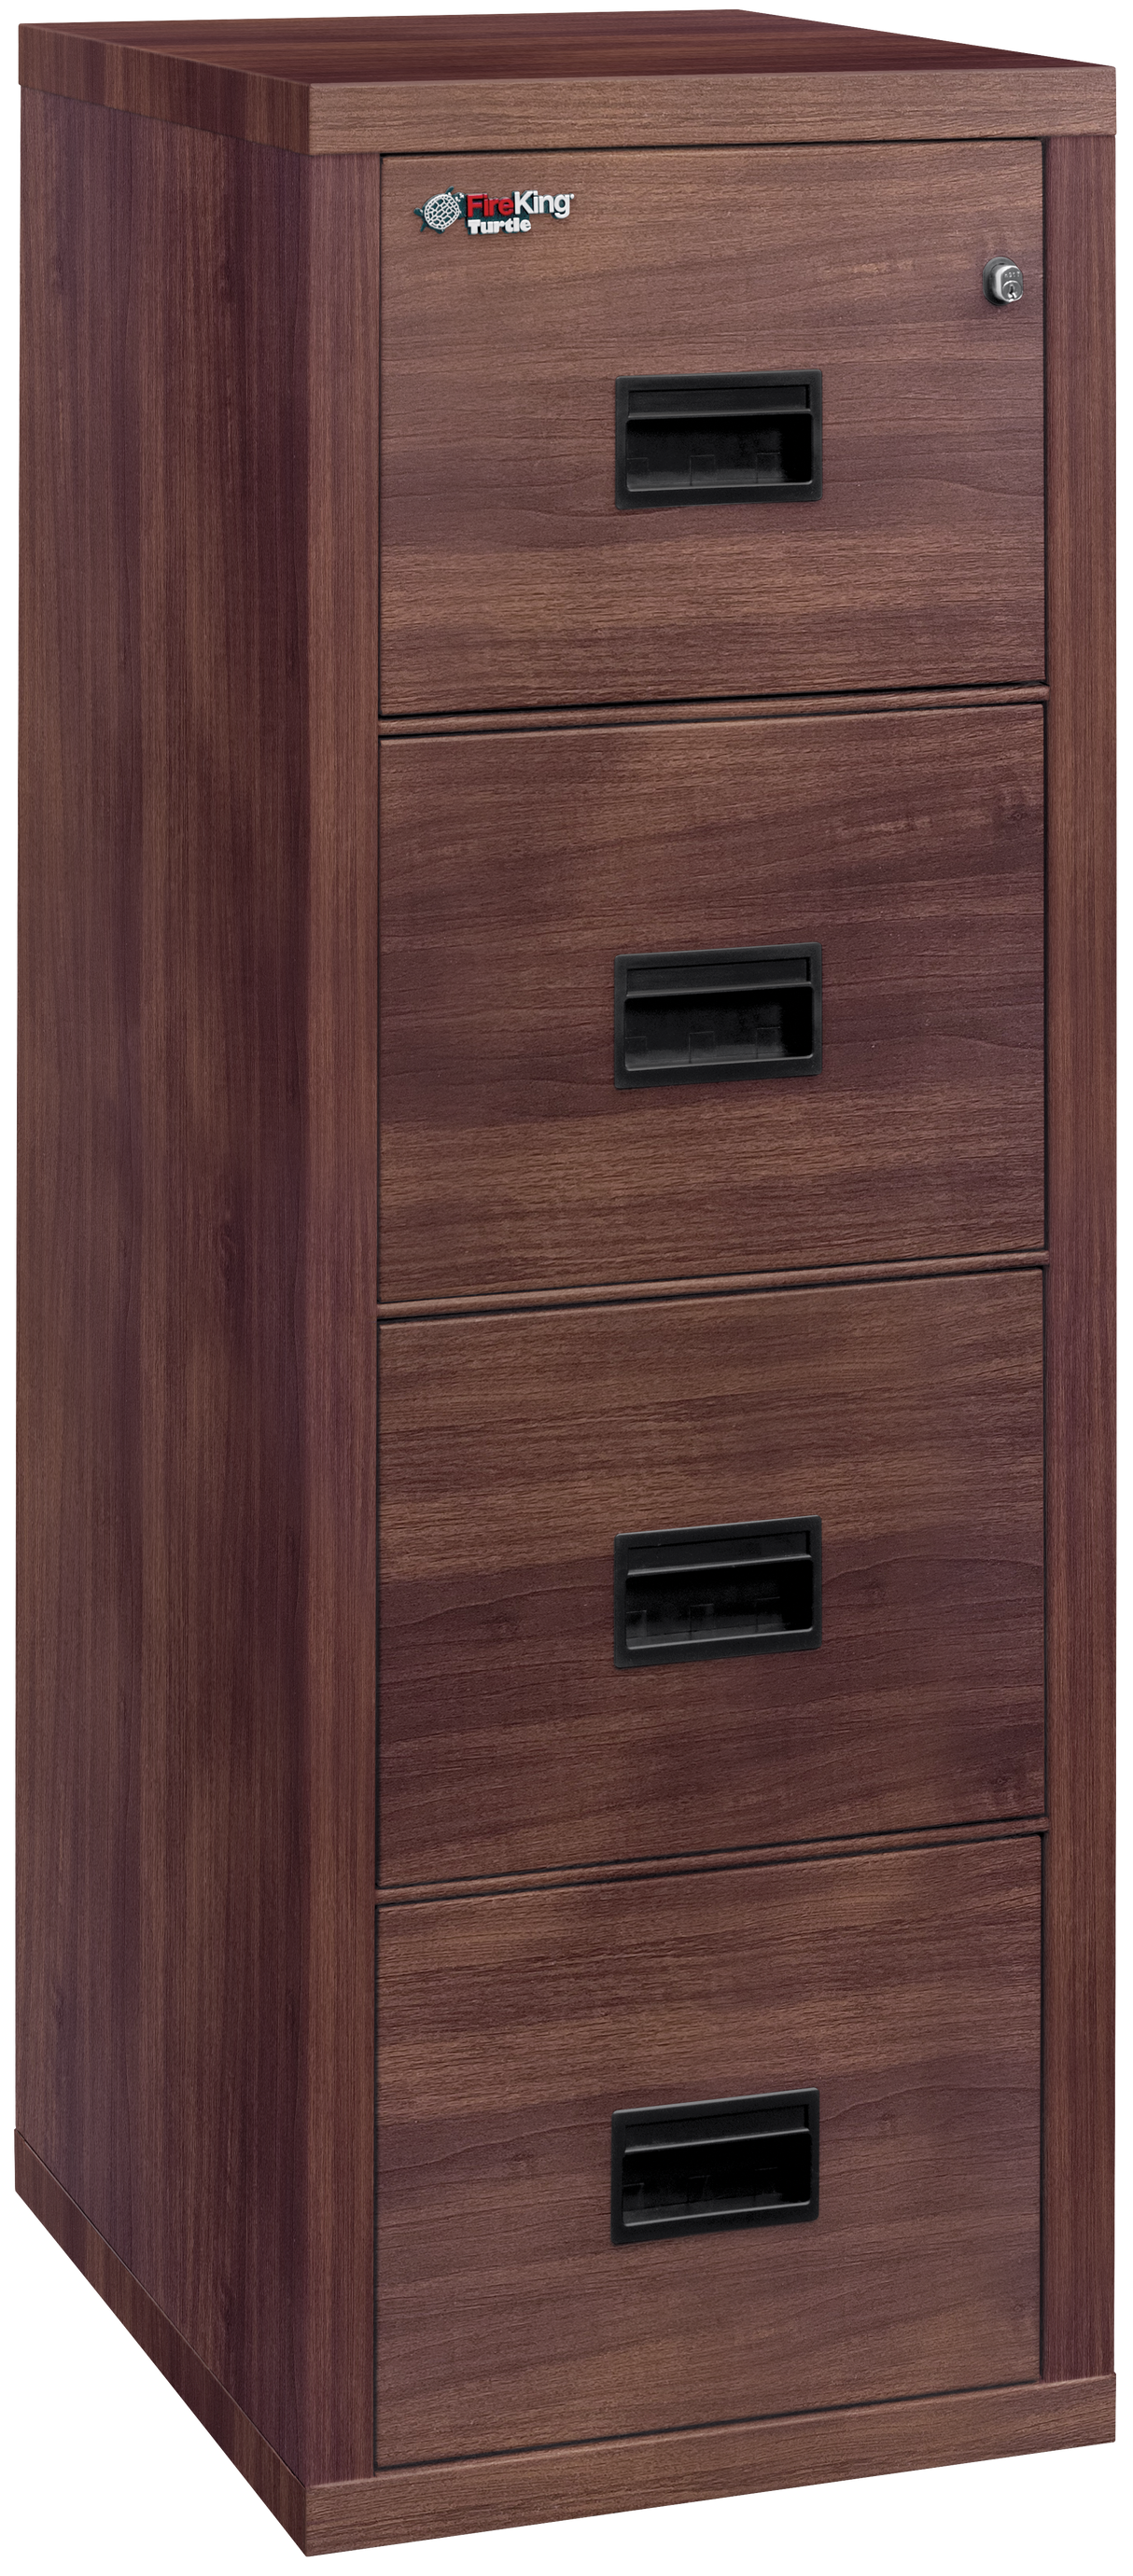 FireKing Turtle Designer Series Vertical File Cabinet (1-Hour Fire Rated)